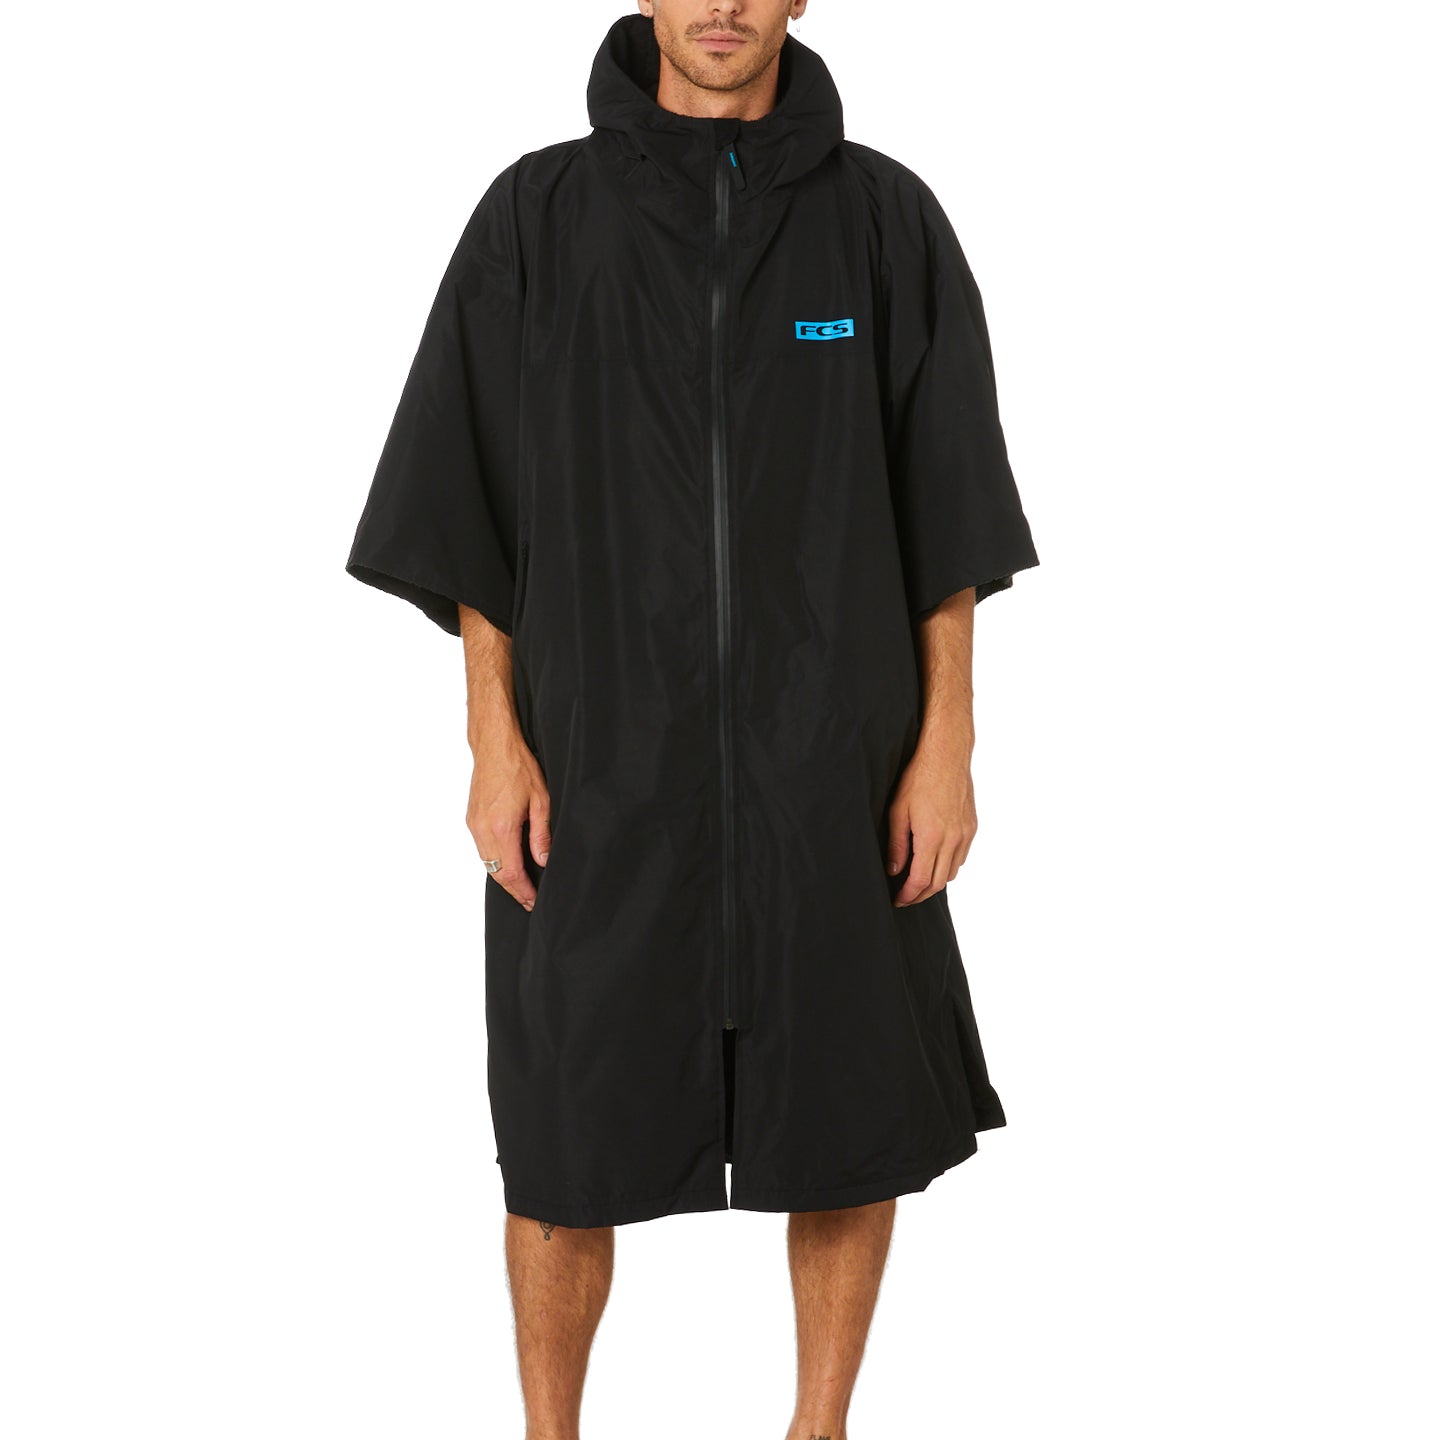 FCS Shelter All Weather Poncho Black L